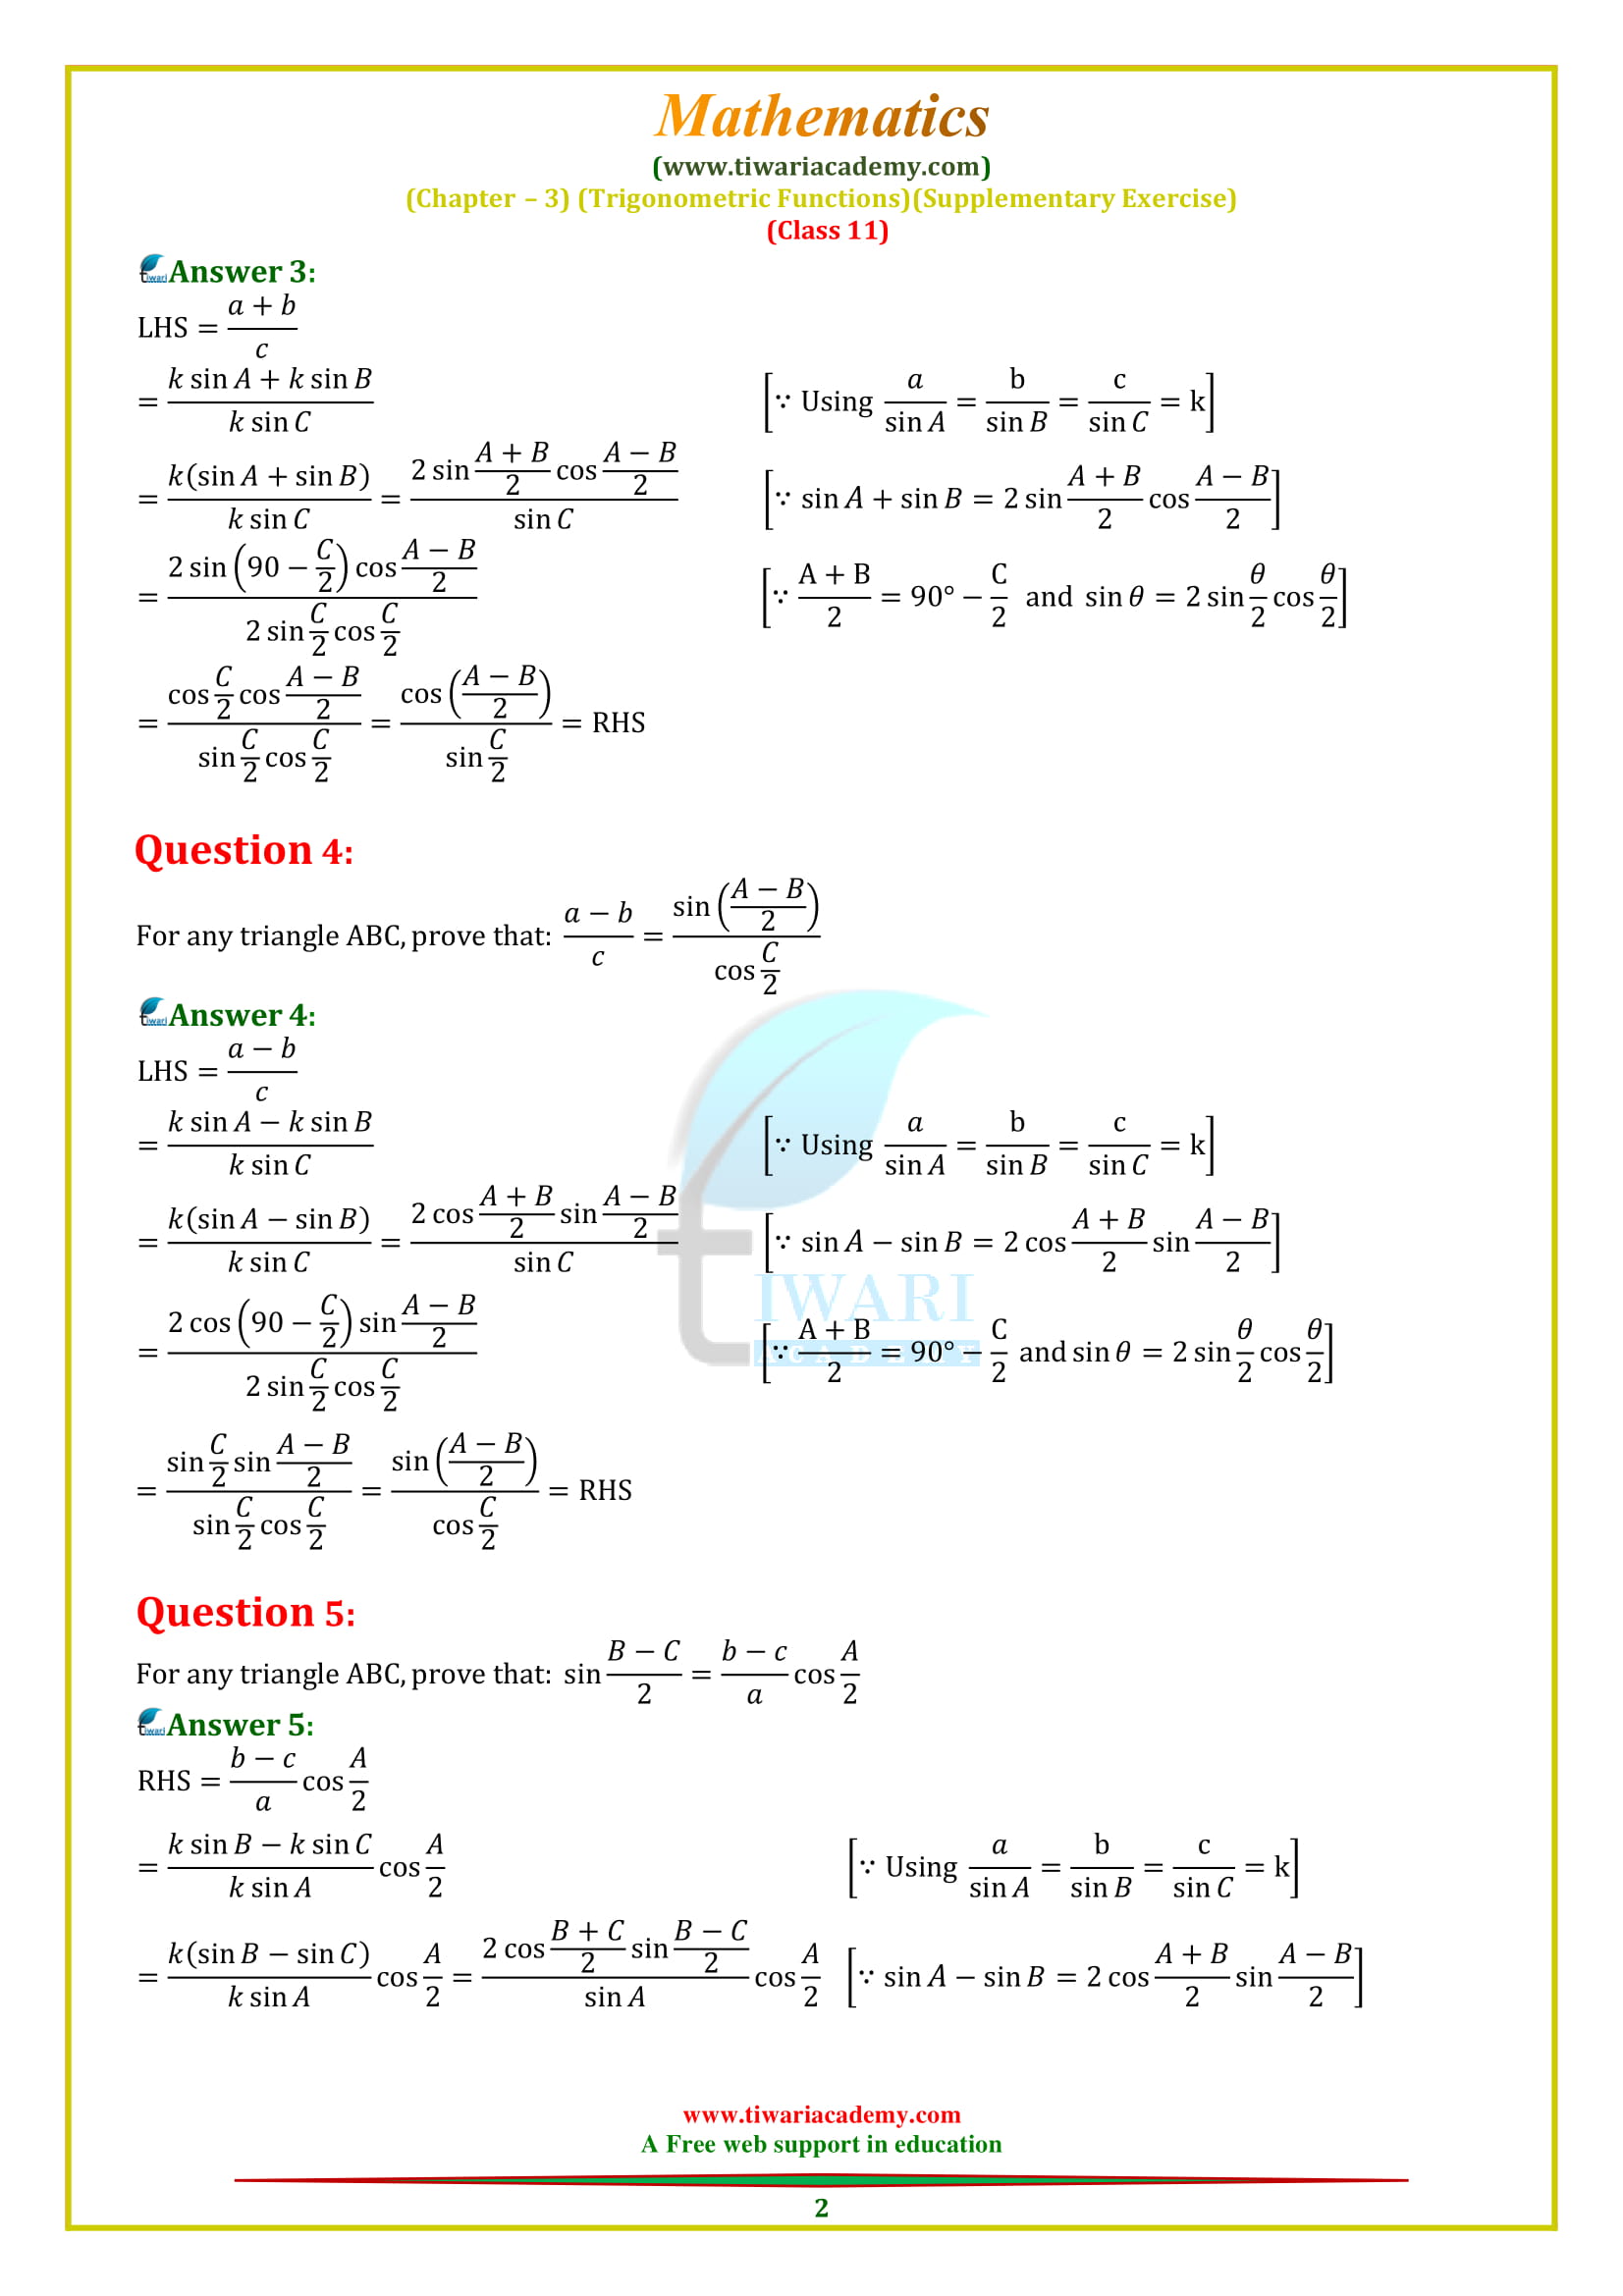 Class 11 Maths Chapter 3 Exercise 3.5 Supplementary Exercise all questions